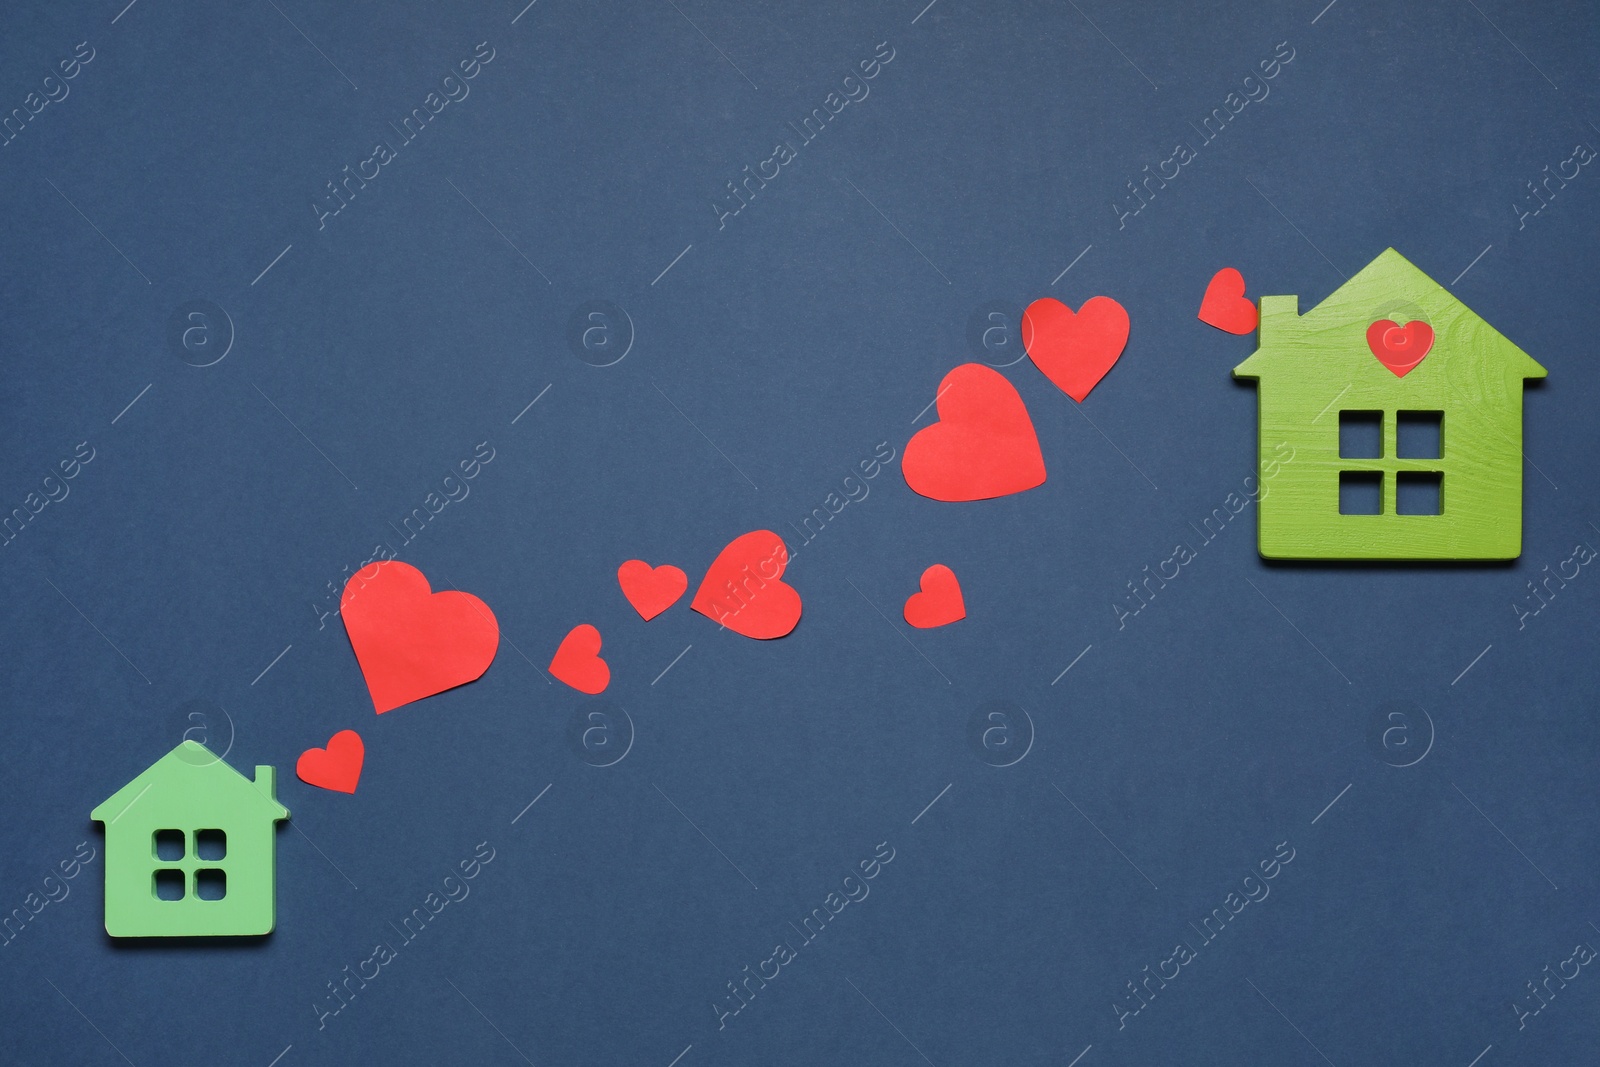 Photo of Decorative hearts between two green house models on blue background symbolizing connection in long-distance relationship, flat lay